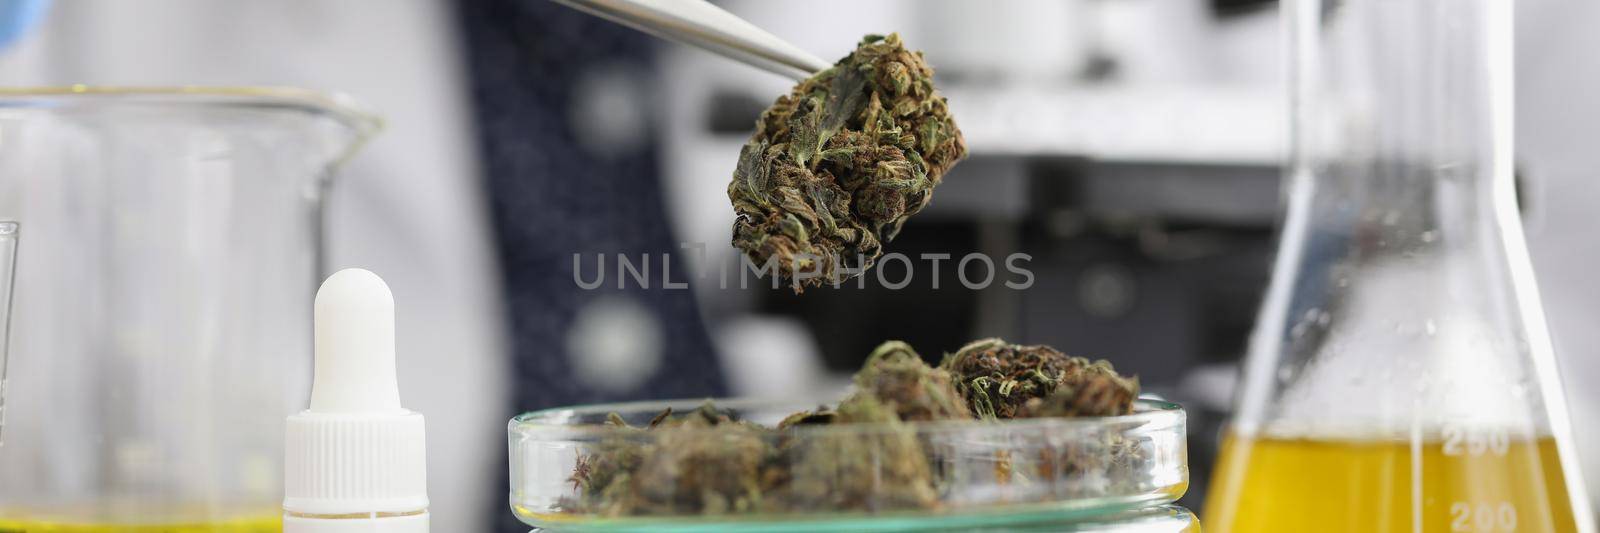 Close-up of glass container with marijuana buds on it placed for laboratory investigation. Scientist take cannabis with tweezer tool. Medicine, lab concept